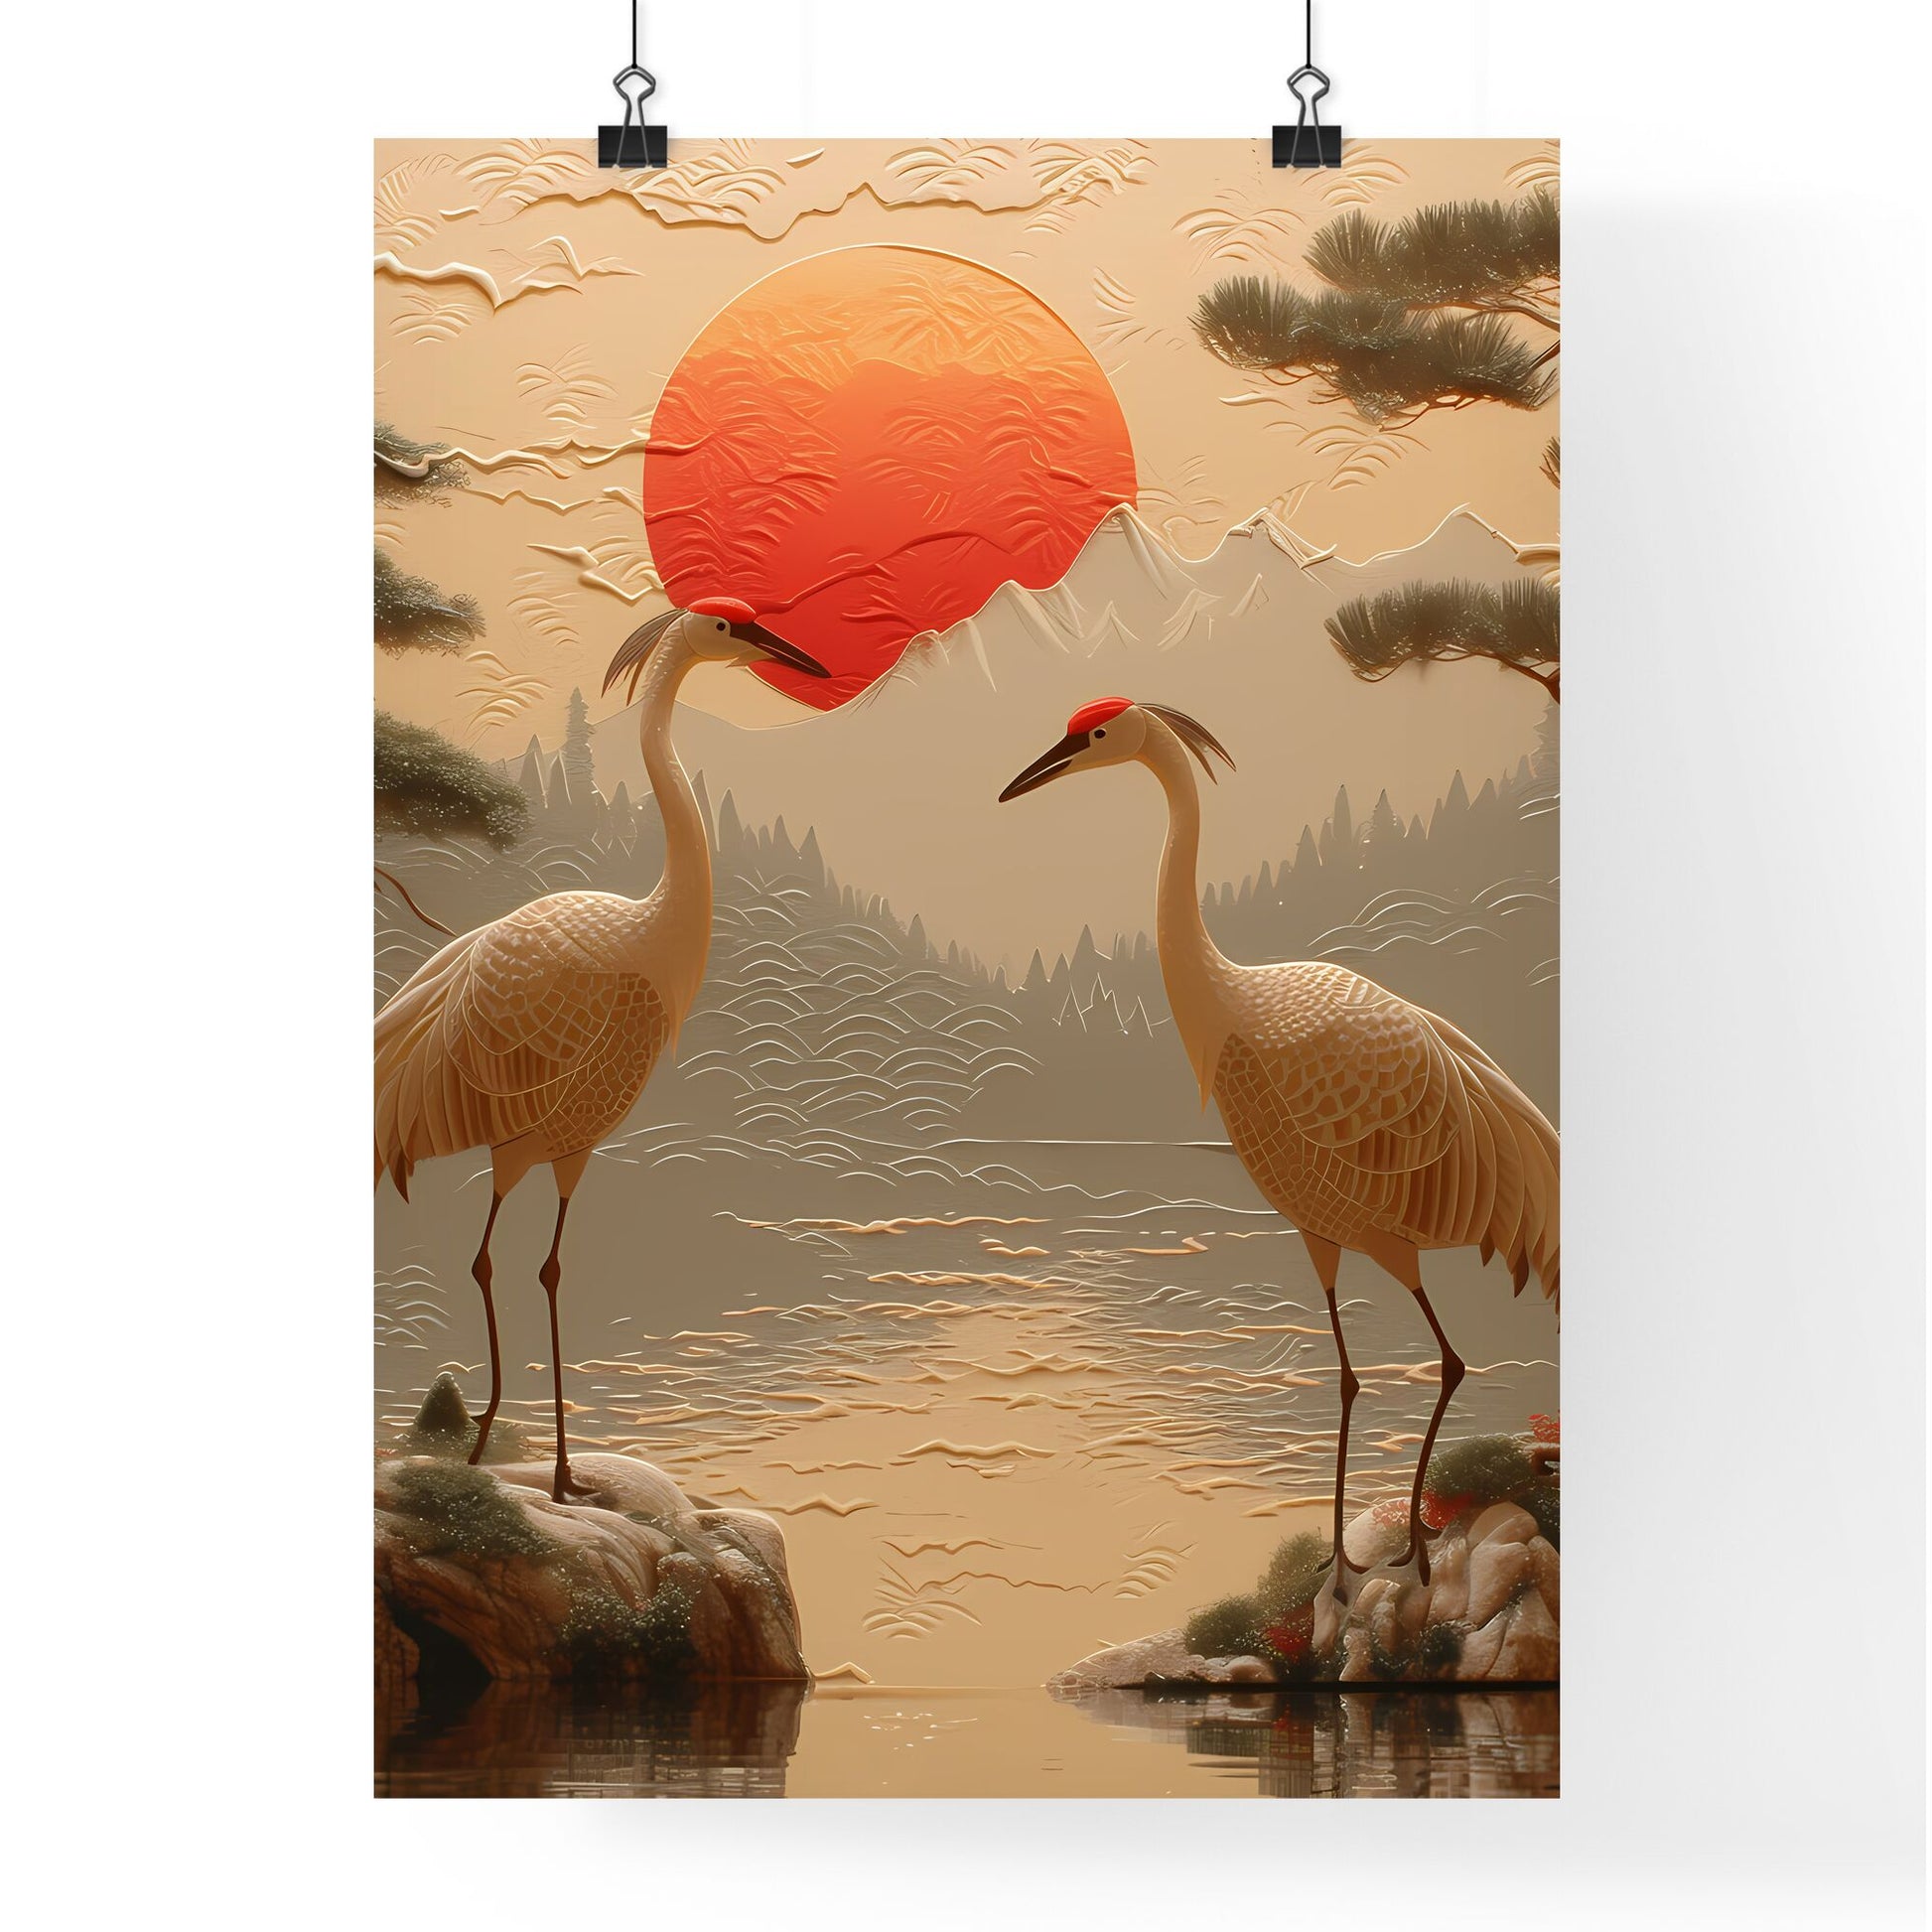 Zhuque paper-cut, new Chinese style, Chinese wind, pattern pattern - Art print of a painting of two cranes on rocks by water Default Title